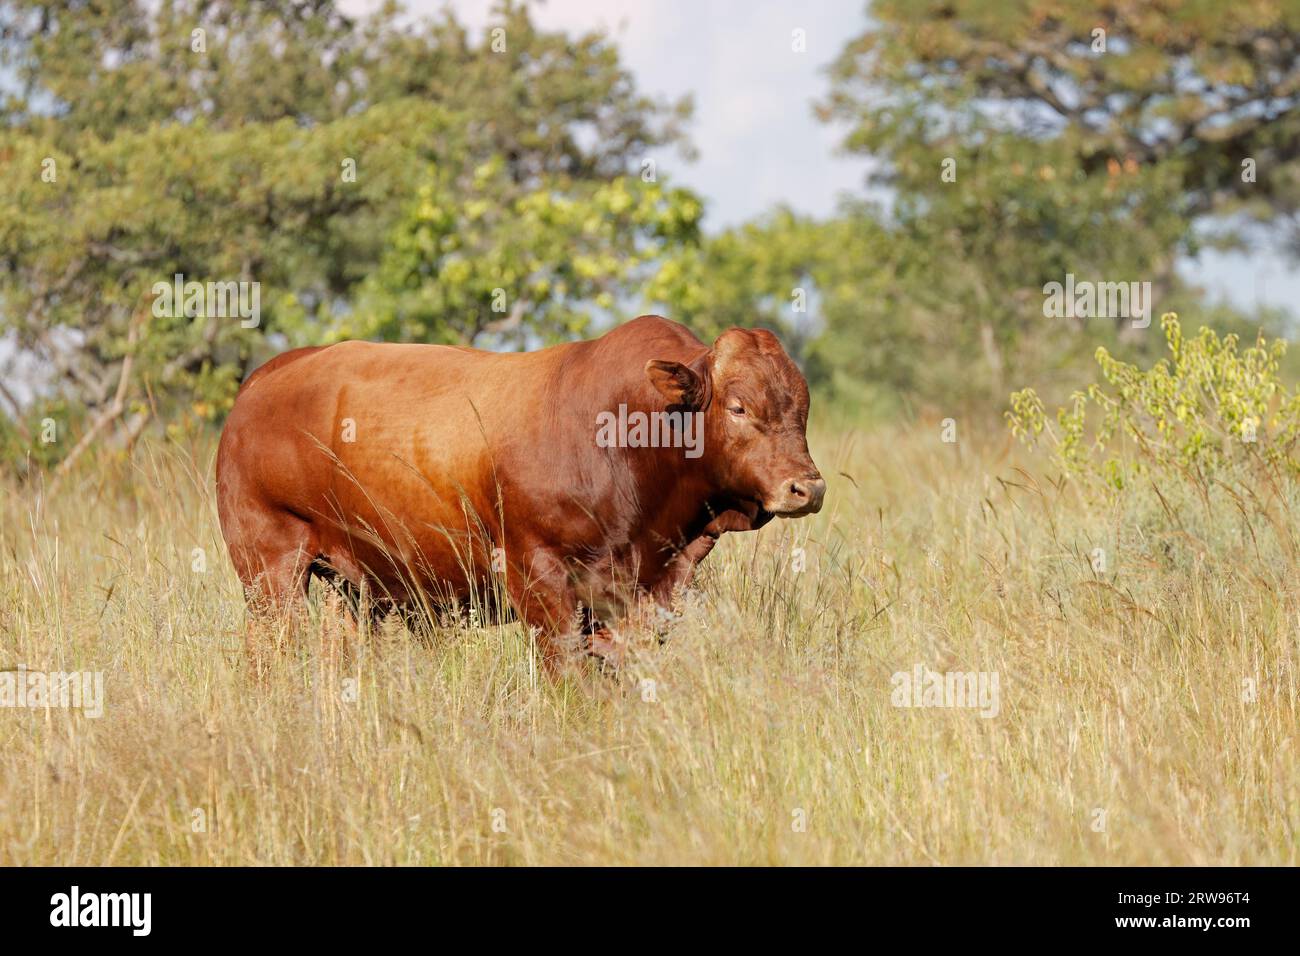 A free-range bull in native grassland on a rural farm, South Africa Stock Photo